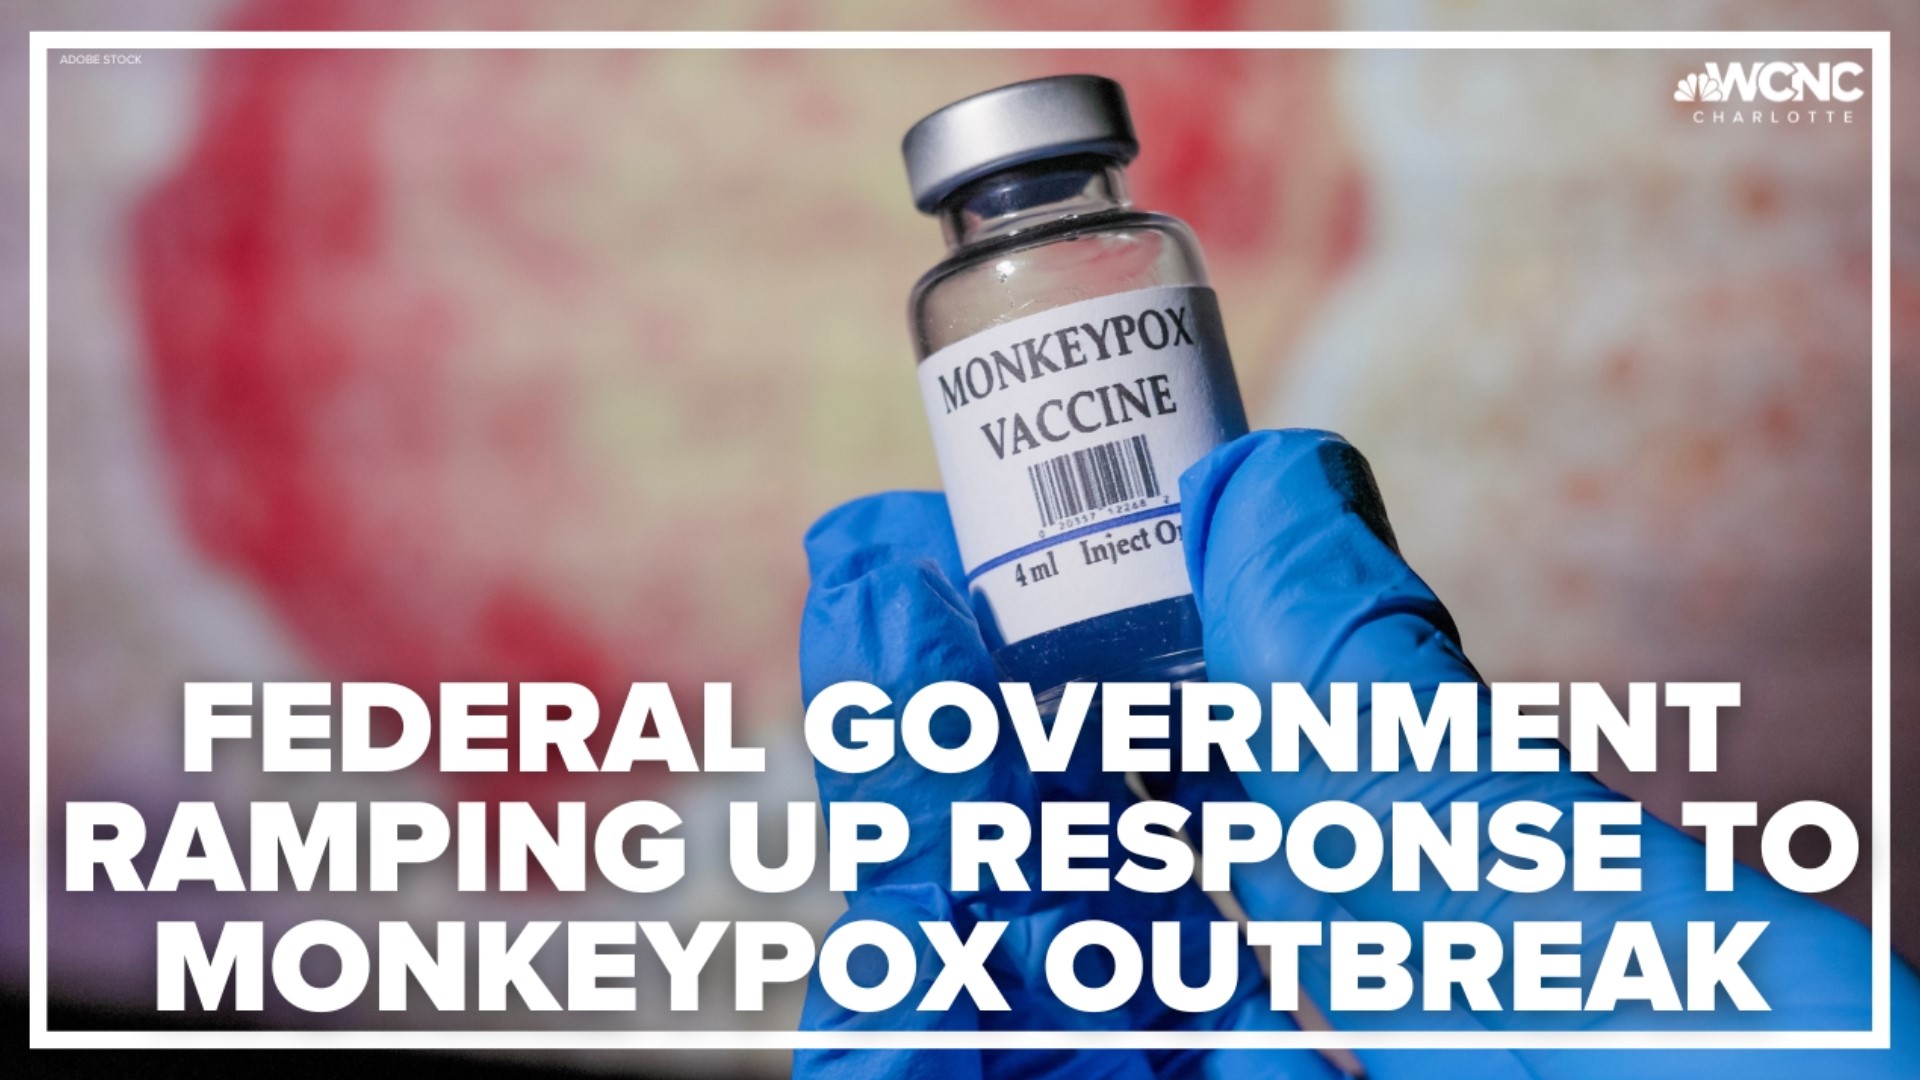 A strategy shift that allows more shots to be drawn from each vial allowed the U.S. Department of Health and Human Services to ship out more doses than planned.